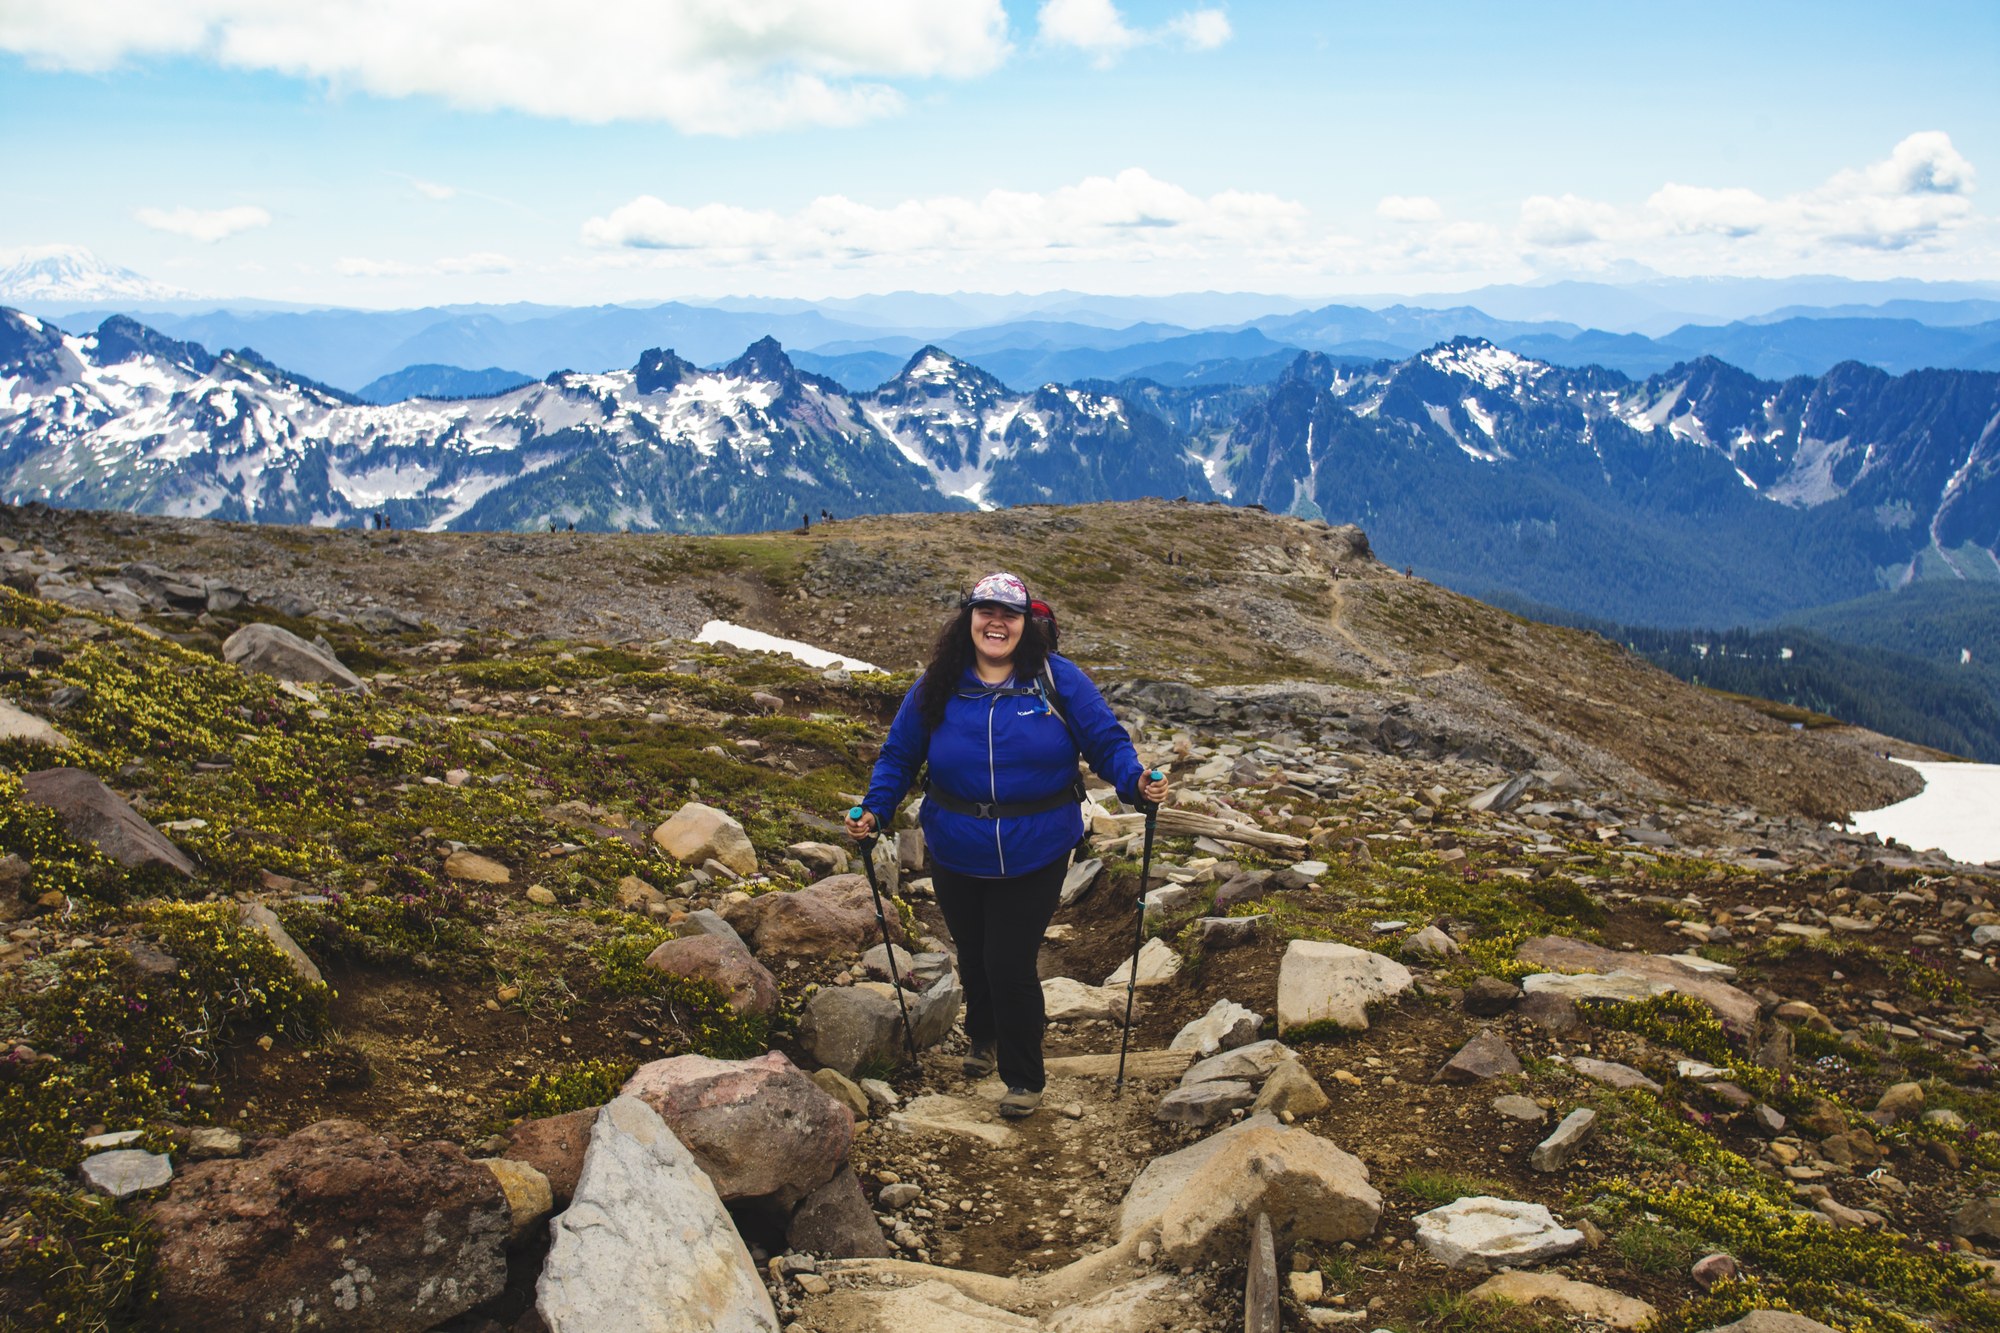 Outdoor Retailers Lack of Plus-Size Options - Mountains with Megan